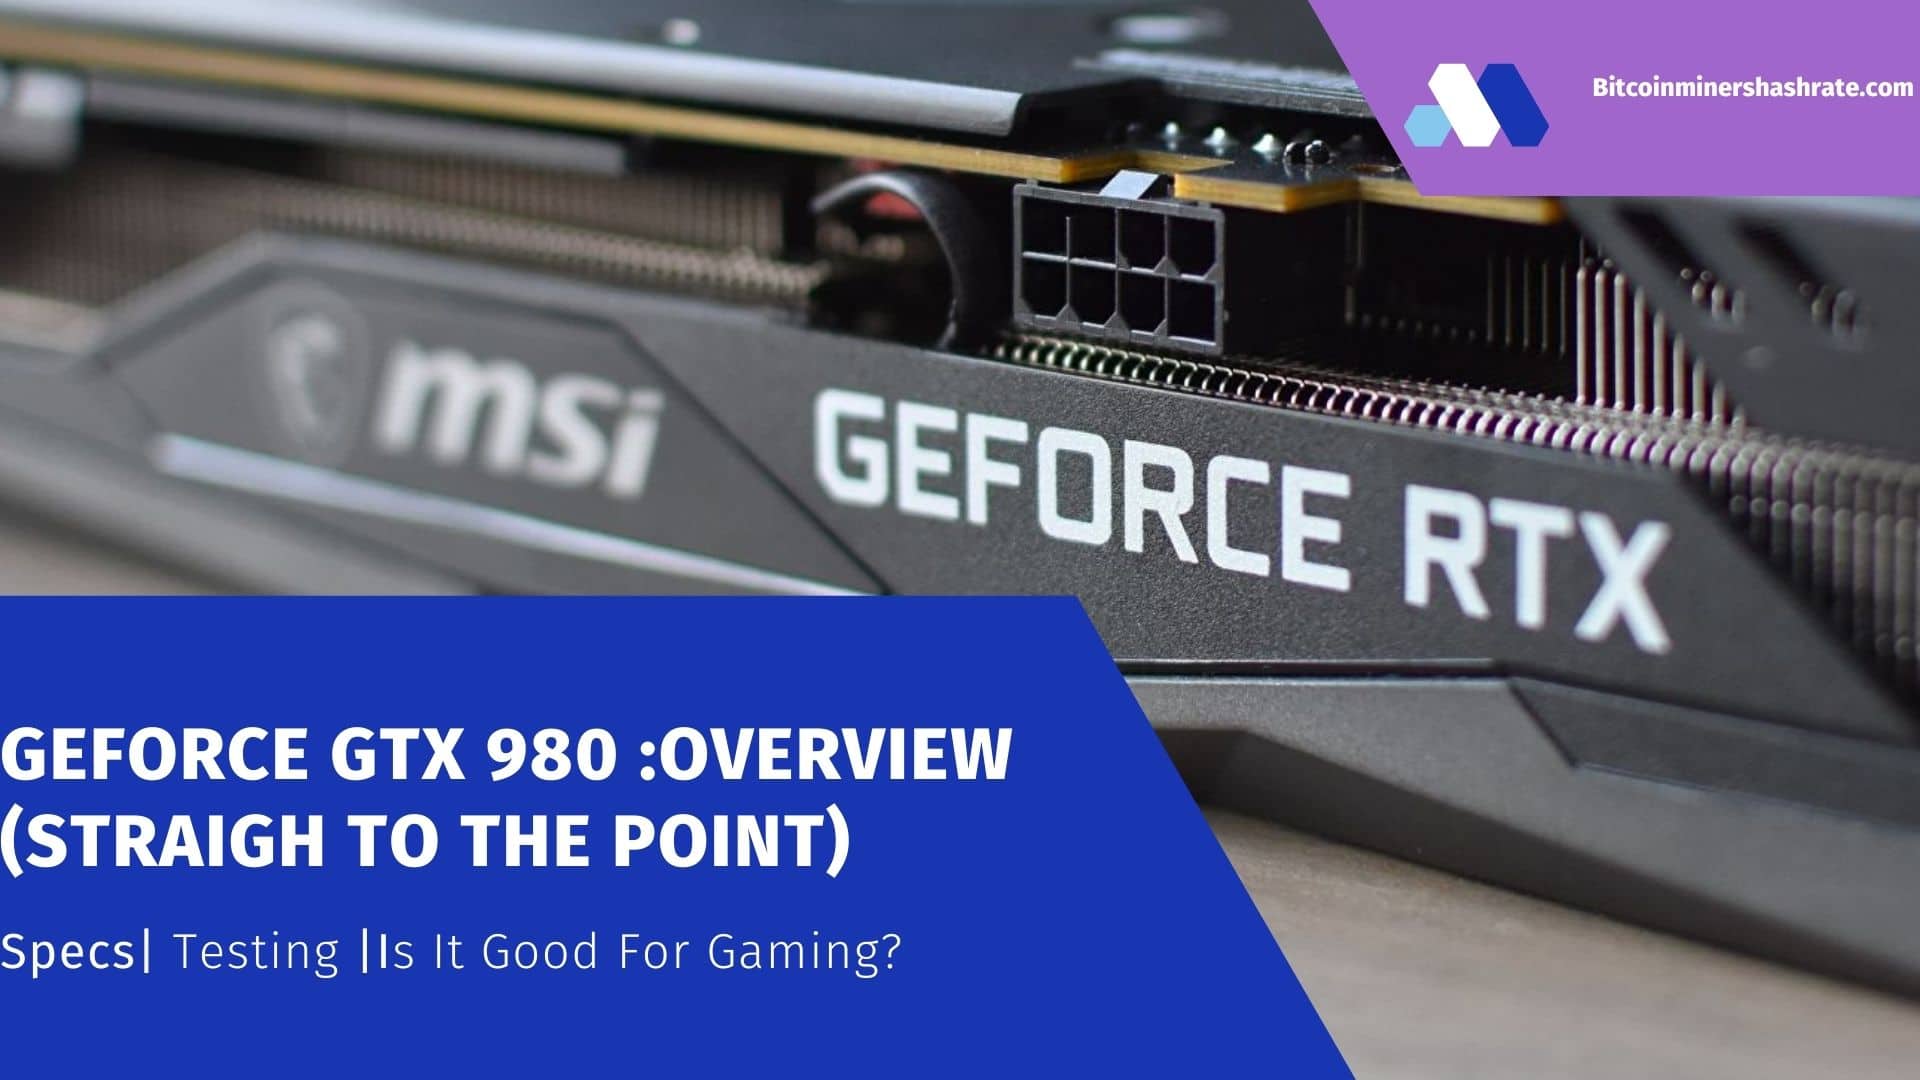 GeForce GTX 980 - Is it Good for Gaming